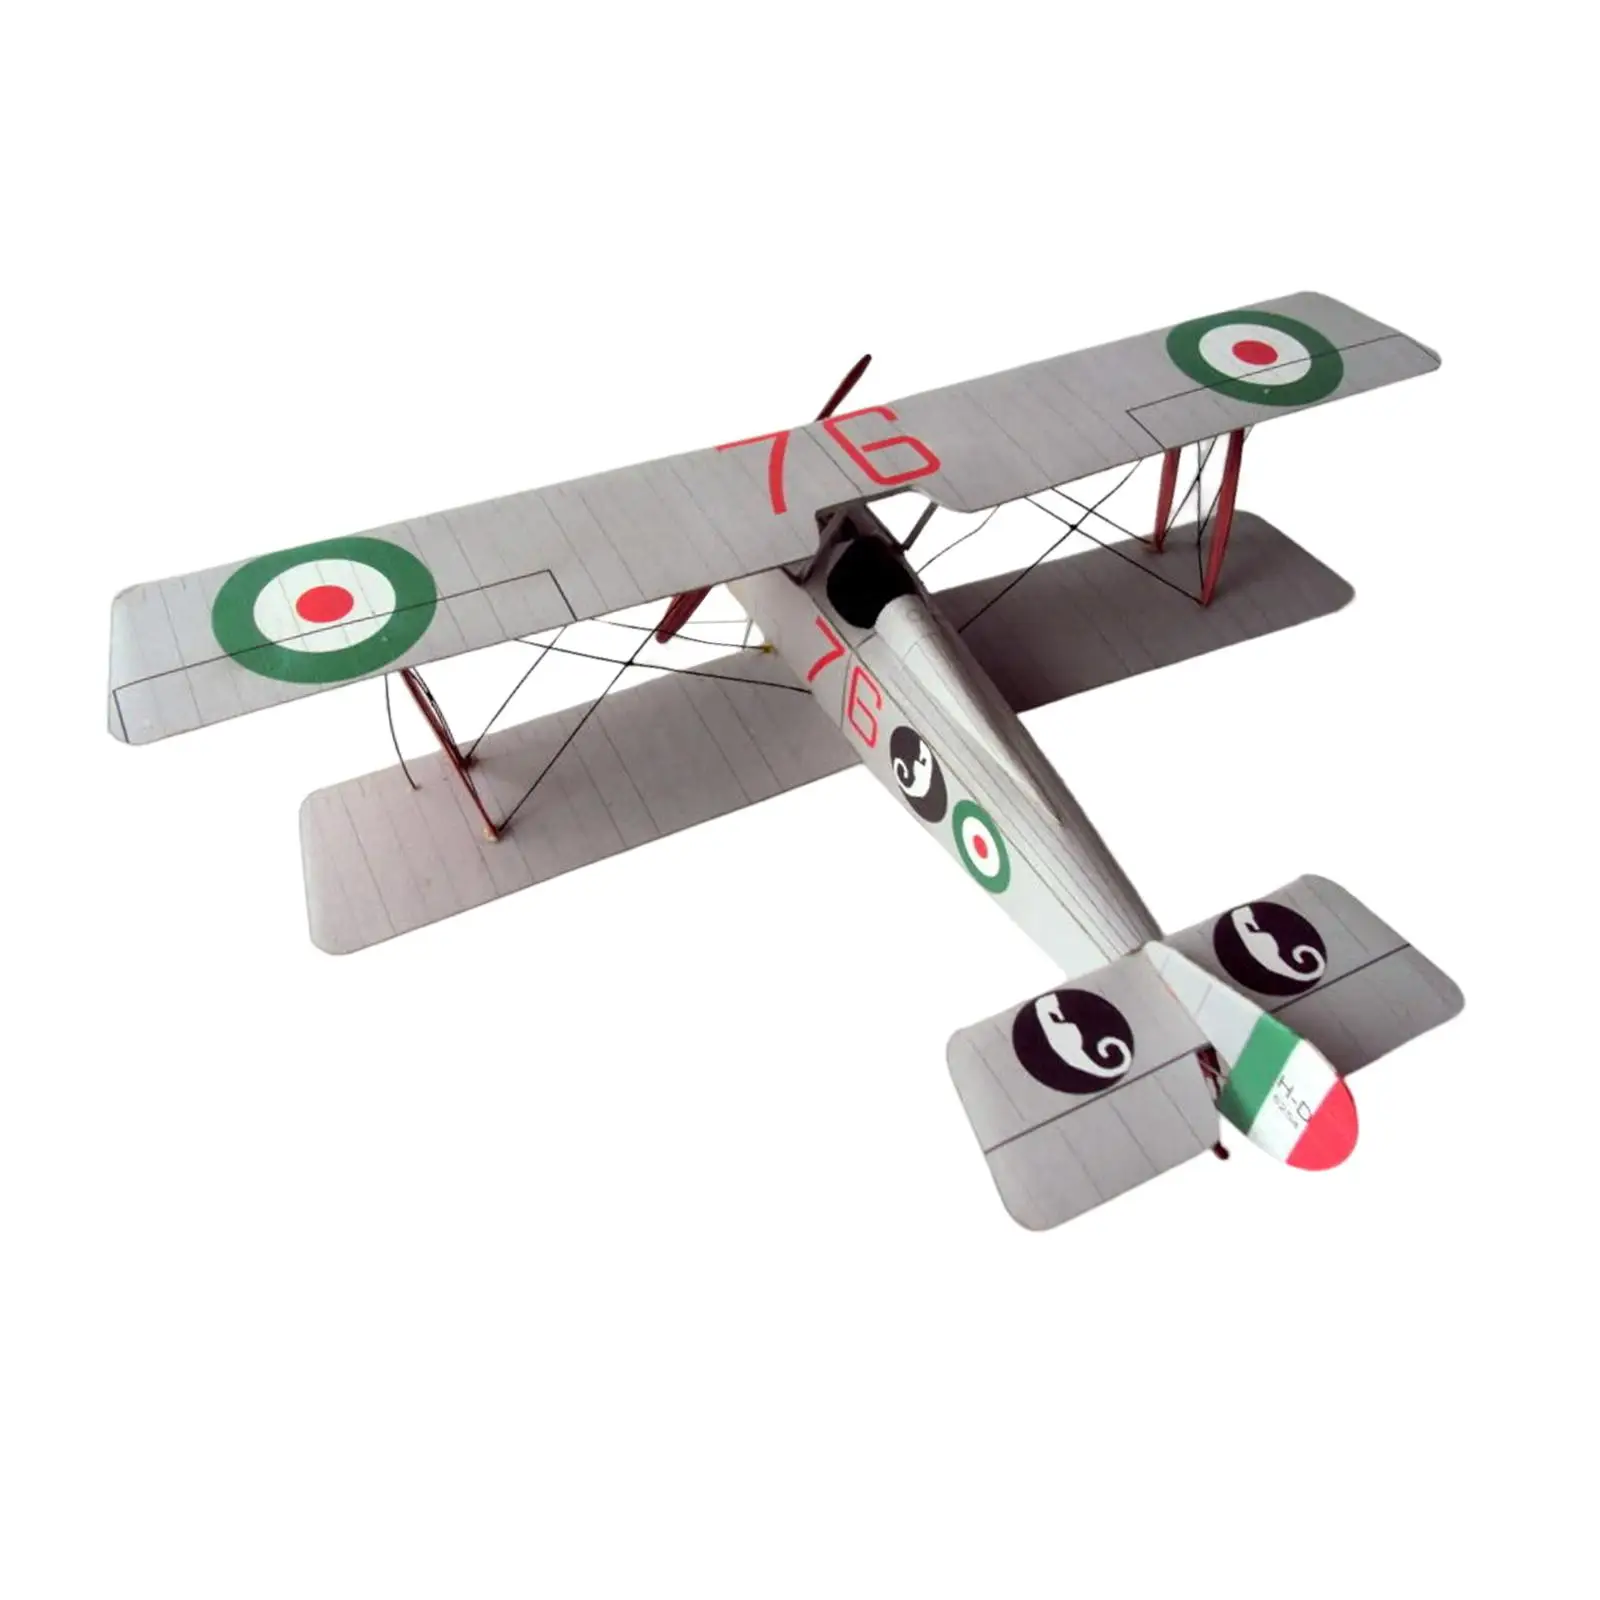 Airplane Kits Aircraft Brain Teaser Puzzle 3D Fighter Paper Model Kit 1:33 Scale for Children Boys Kids Adults Tabletop Decor